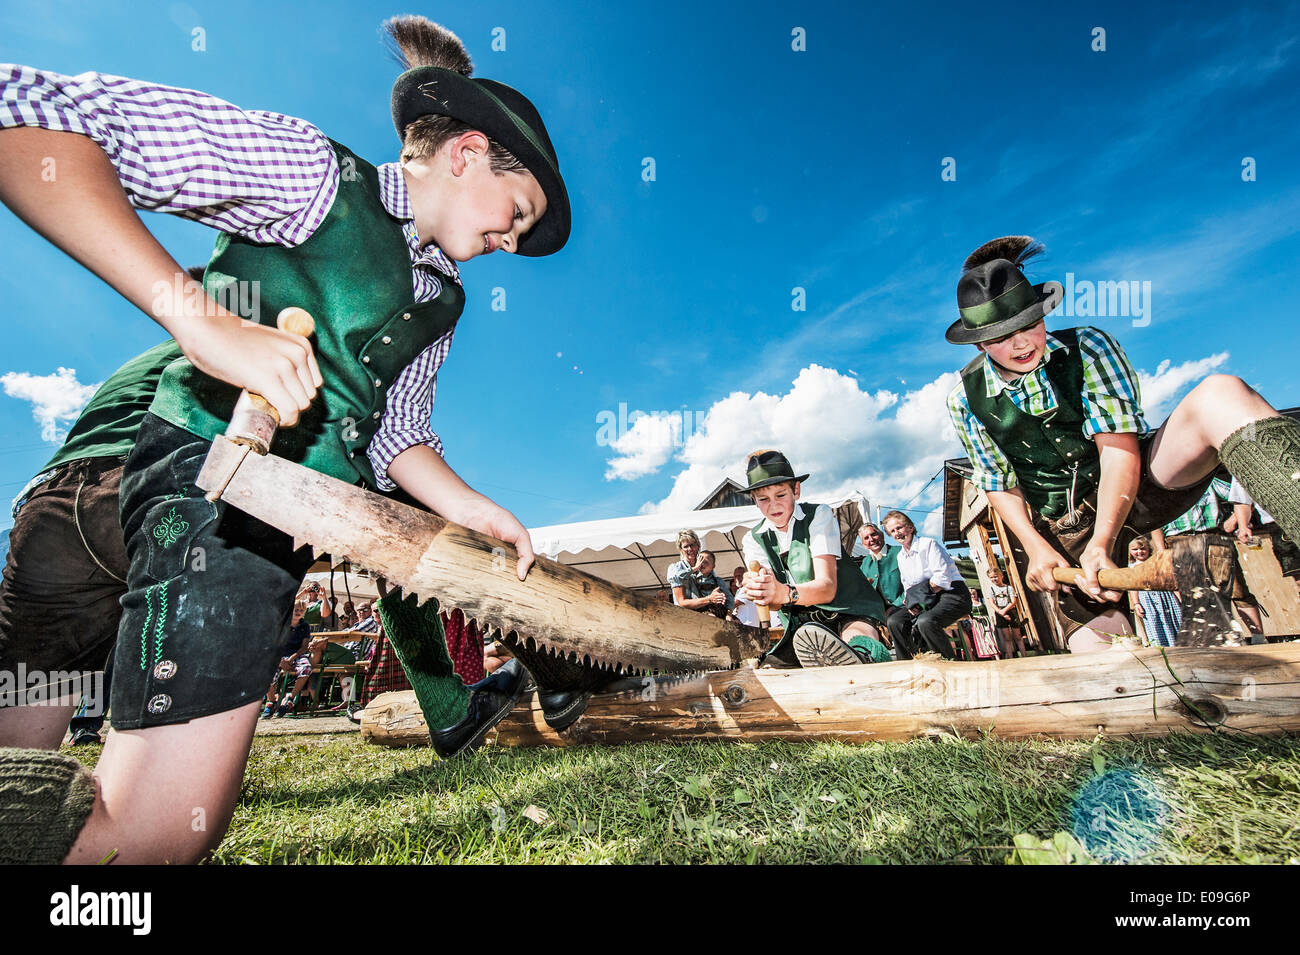 Austria, Idning, Boys in traditional clothing preparing the may pole Stock Photo